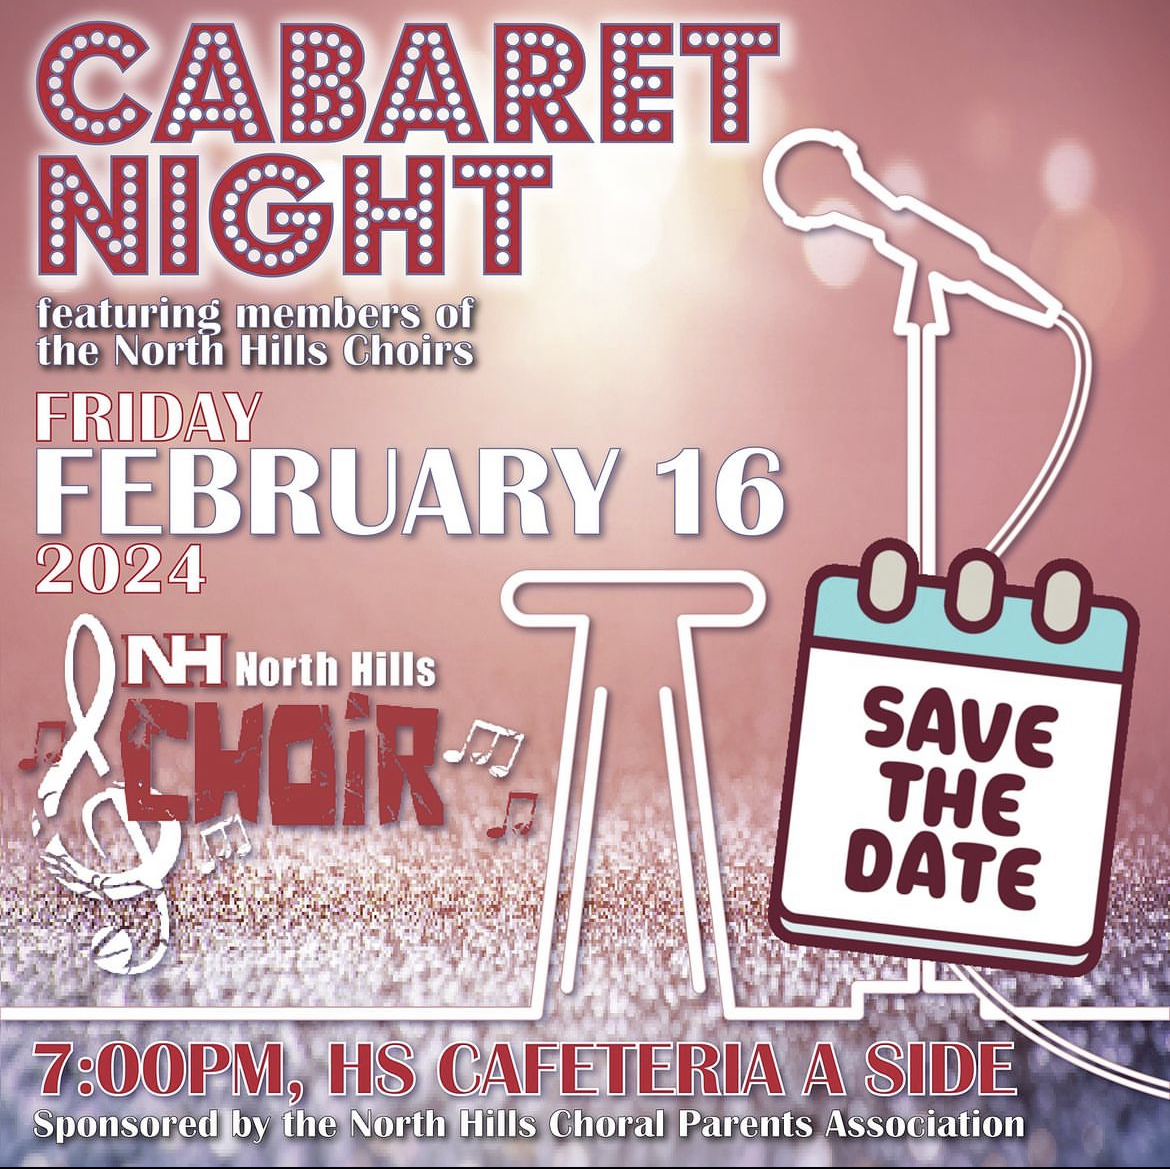 What’s Happening Wednesday: North Hills Choirs Present 13th Annual Cabaret Night